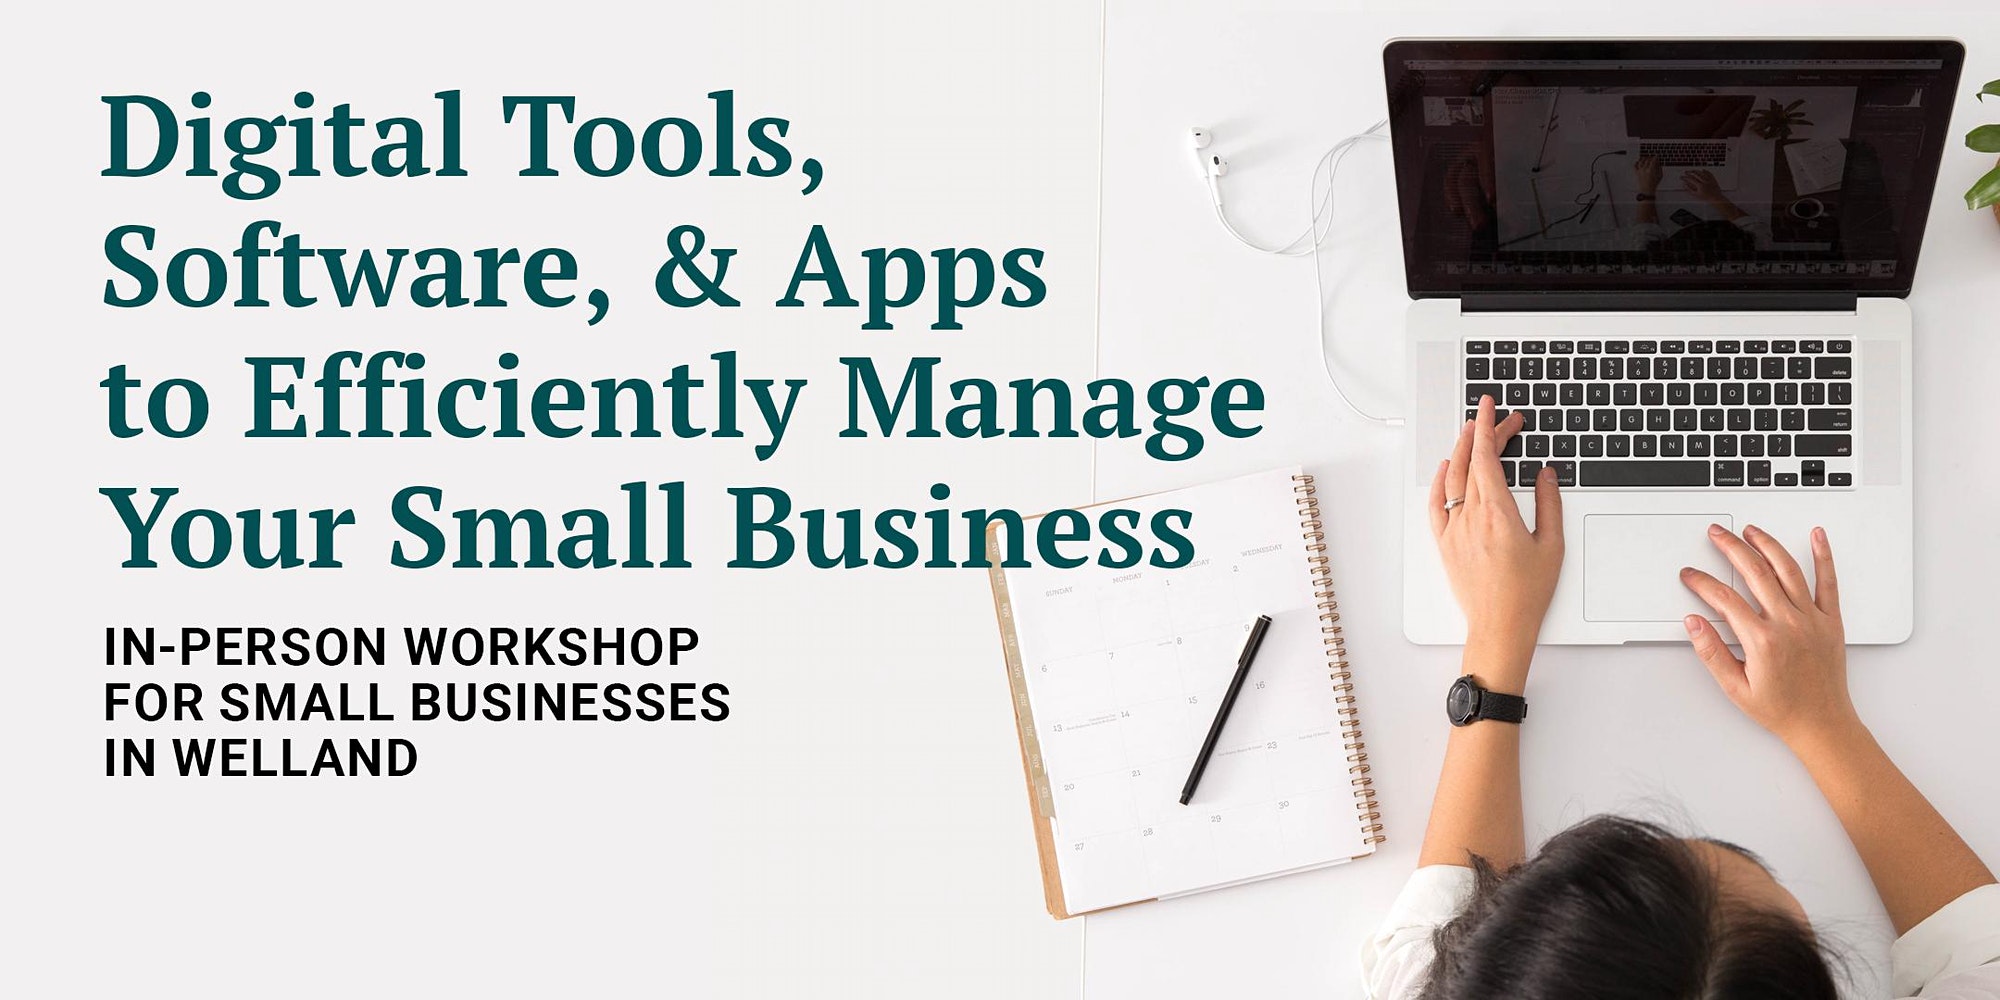 Digital tools, software, & apps to efficiently manage your small business: In-person workshop for small businesses in Welland